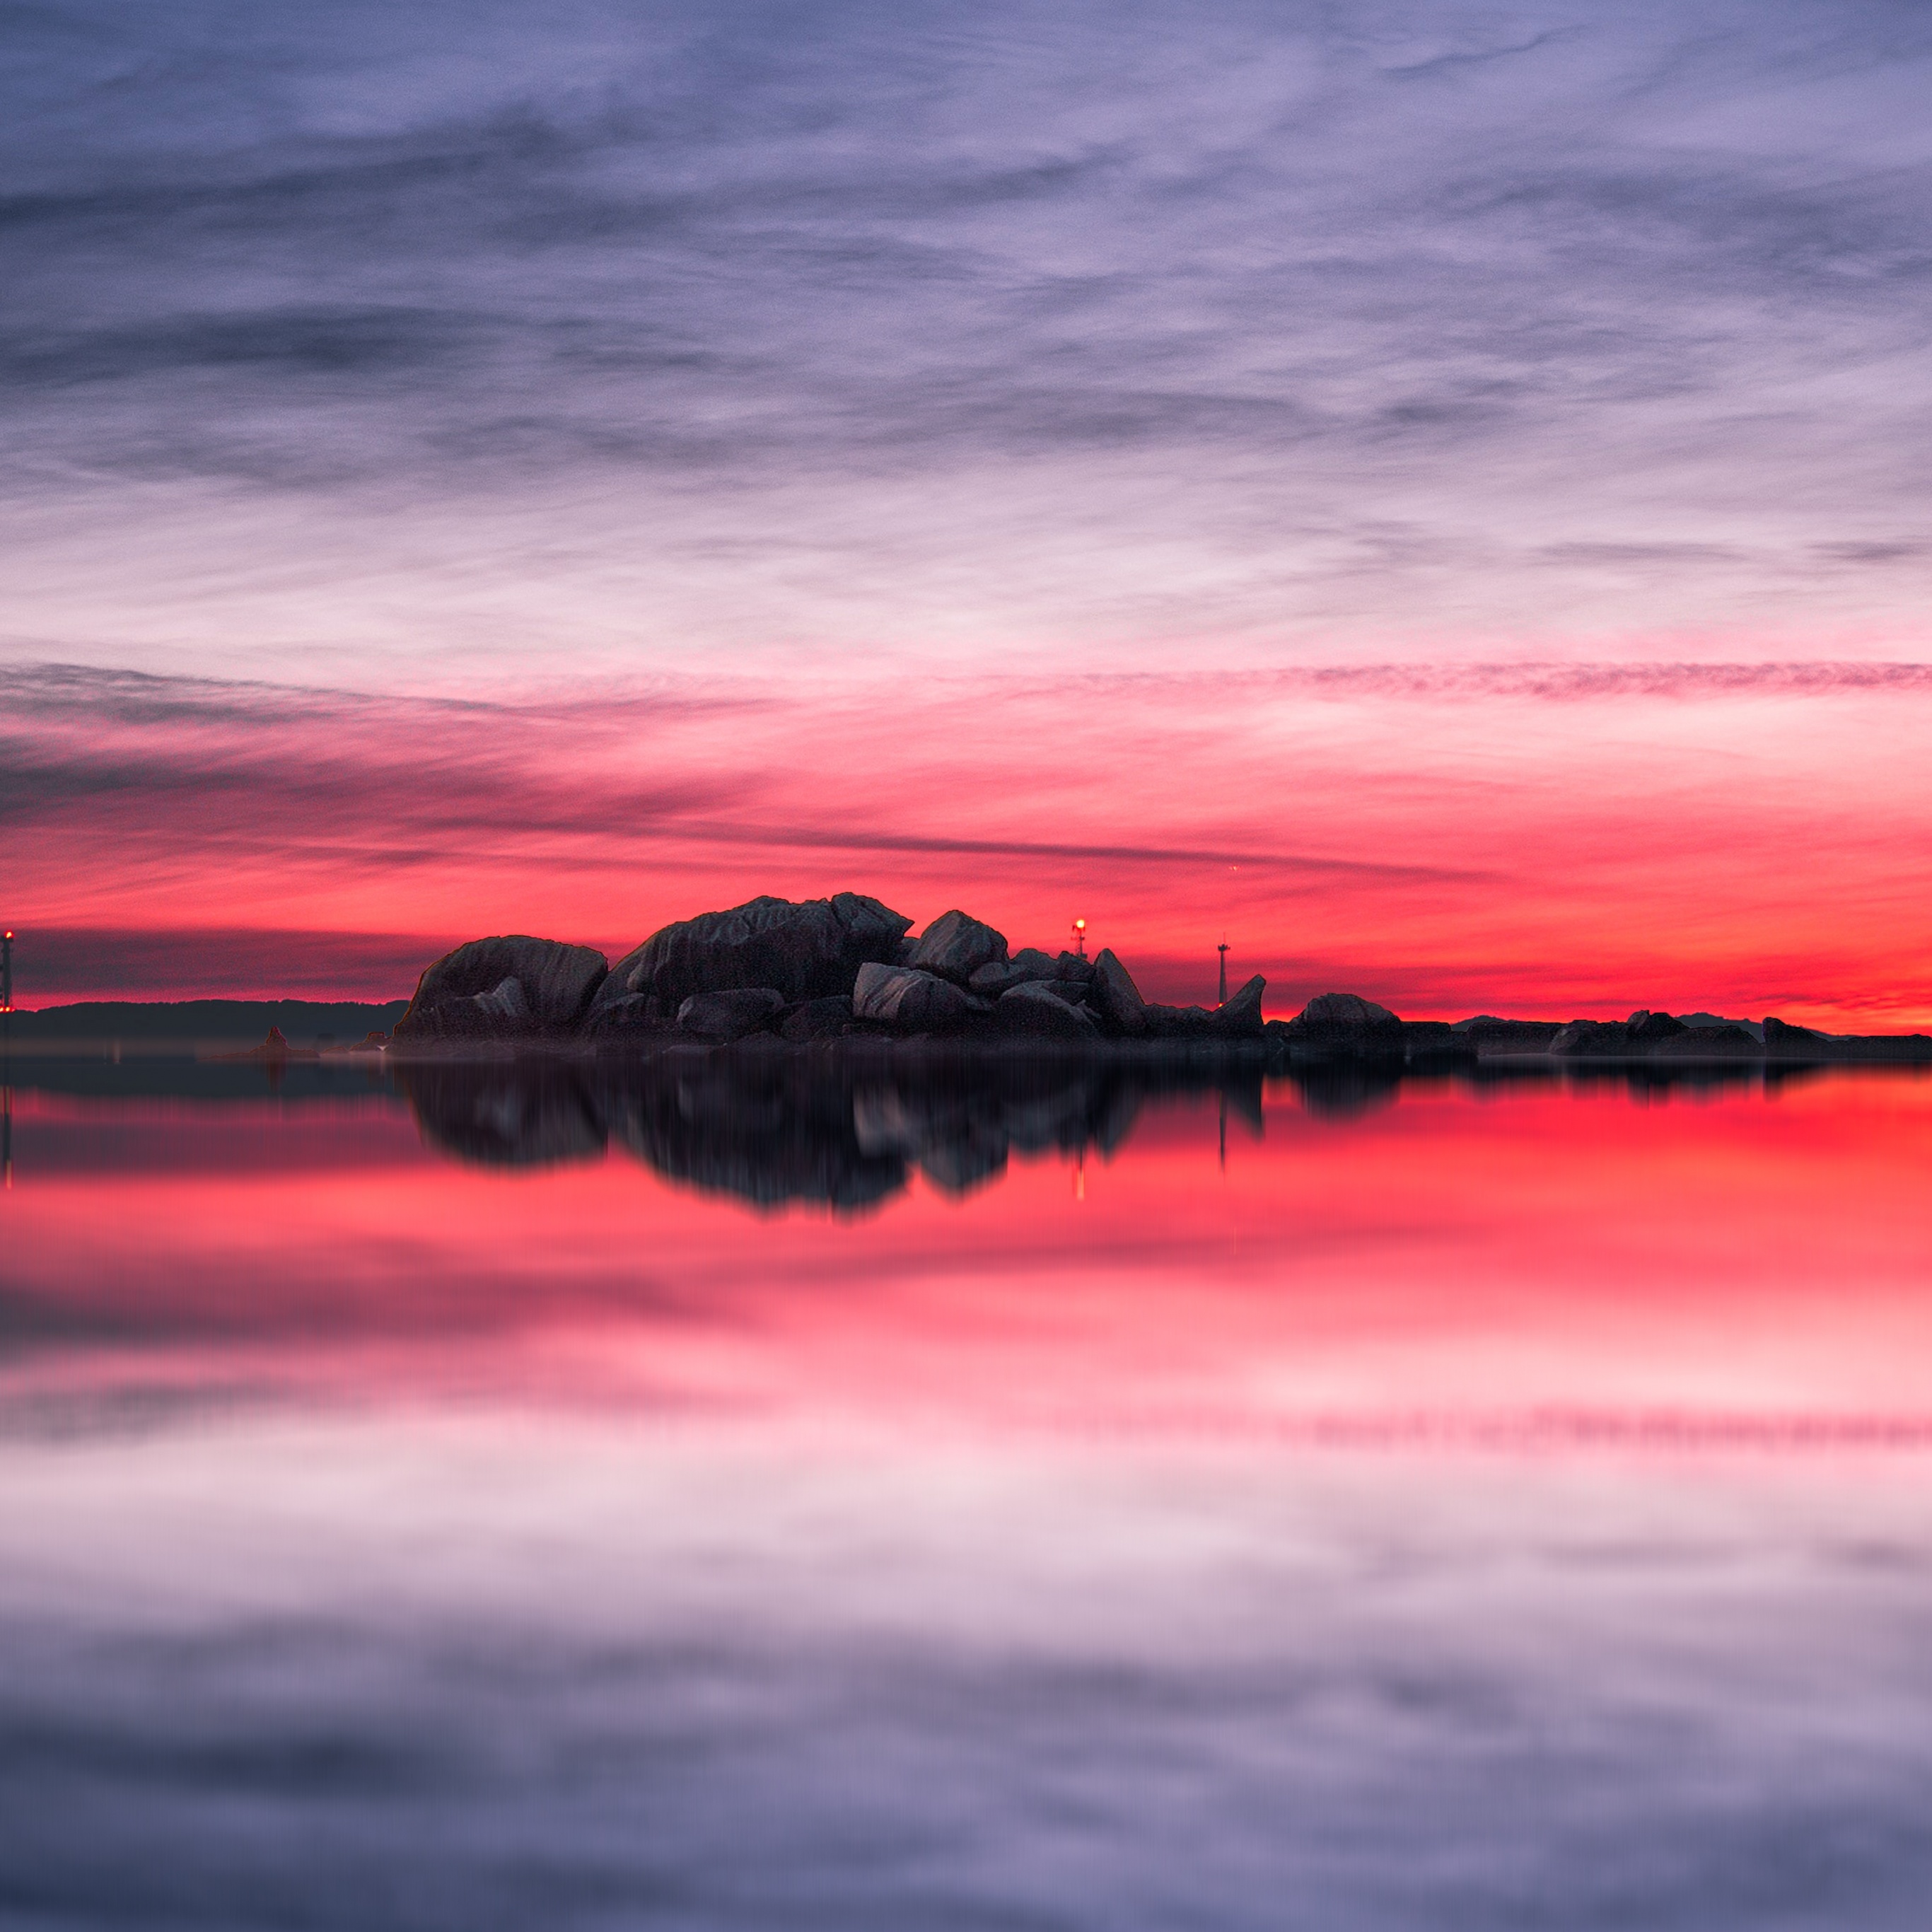 7680x4320 Sunset Clouds Reflection In Lake 8k 8K ,HD 4k Wallpapers